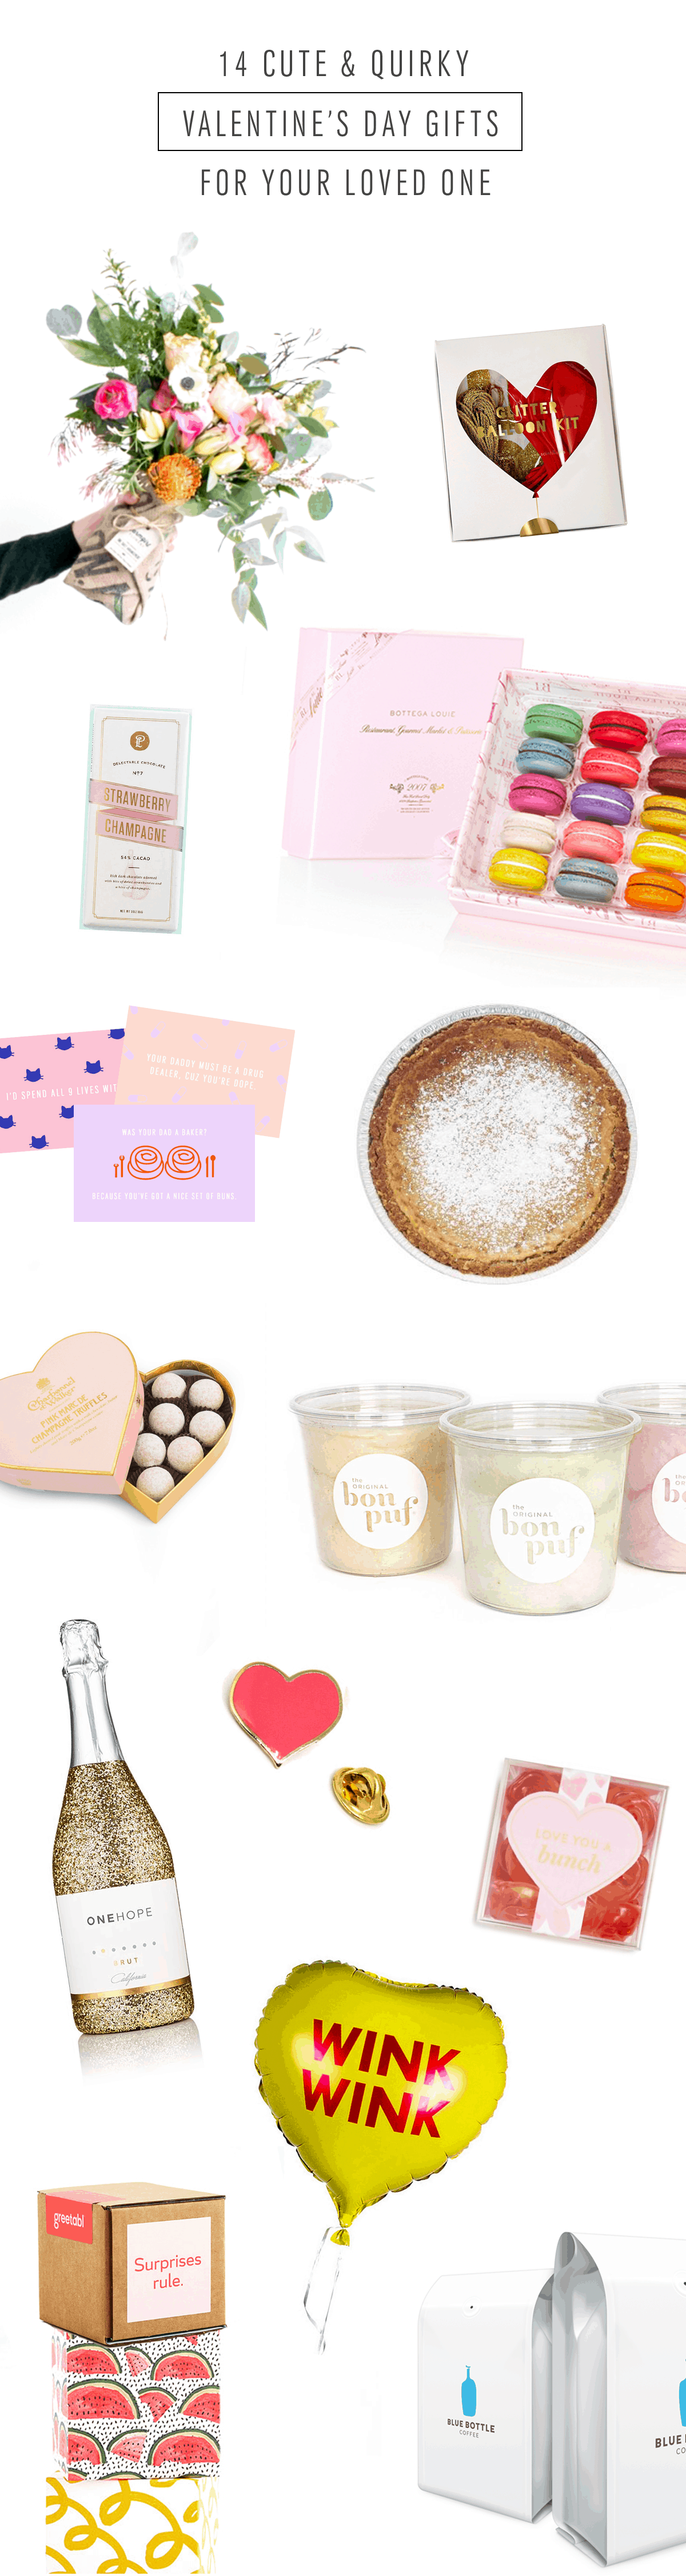 Cute and Quirky Valentine's Day Gifts